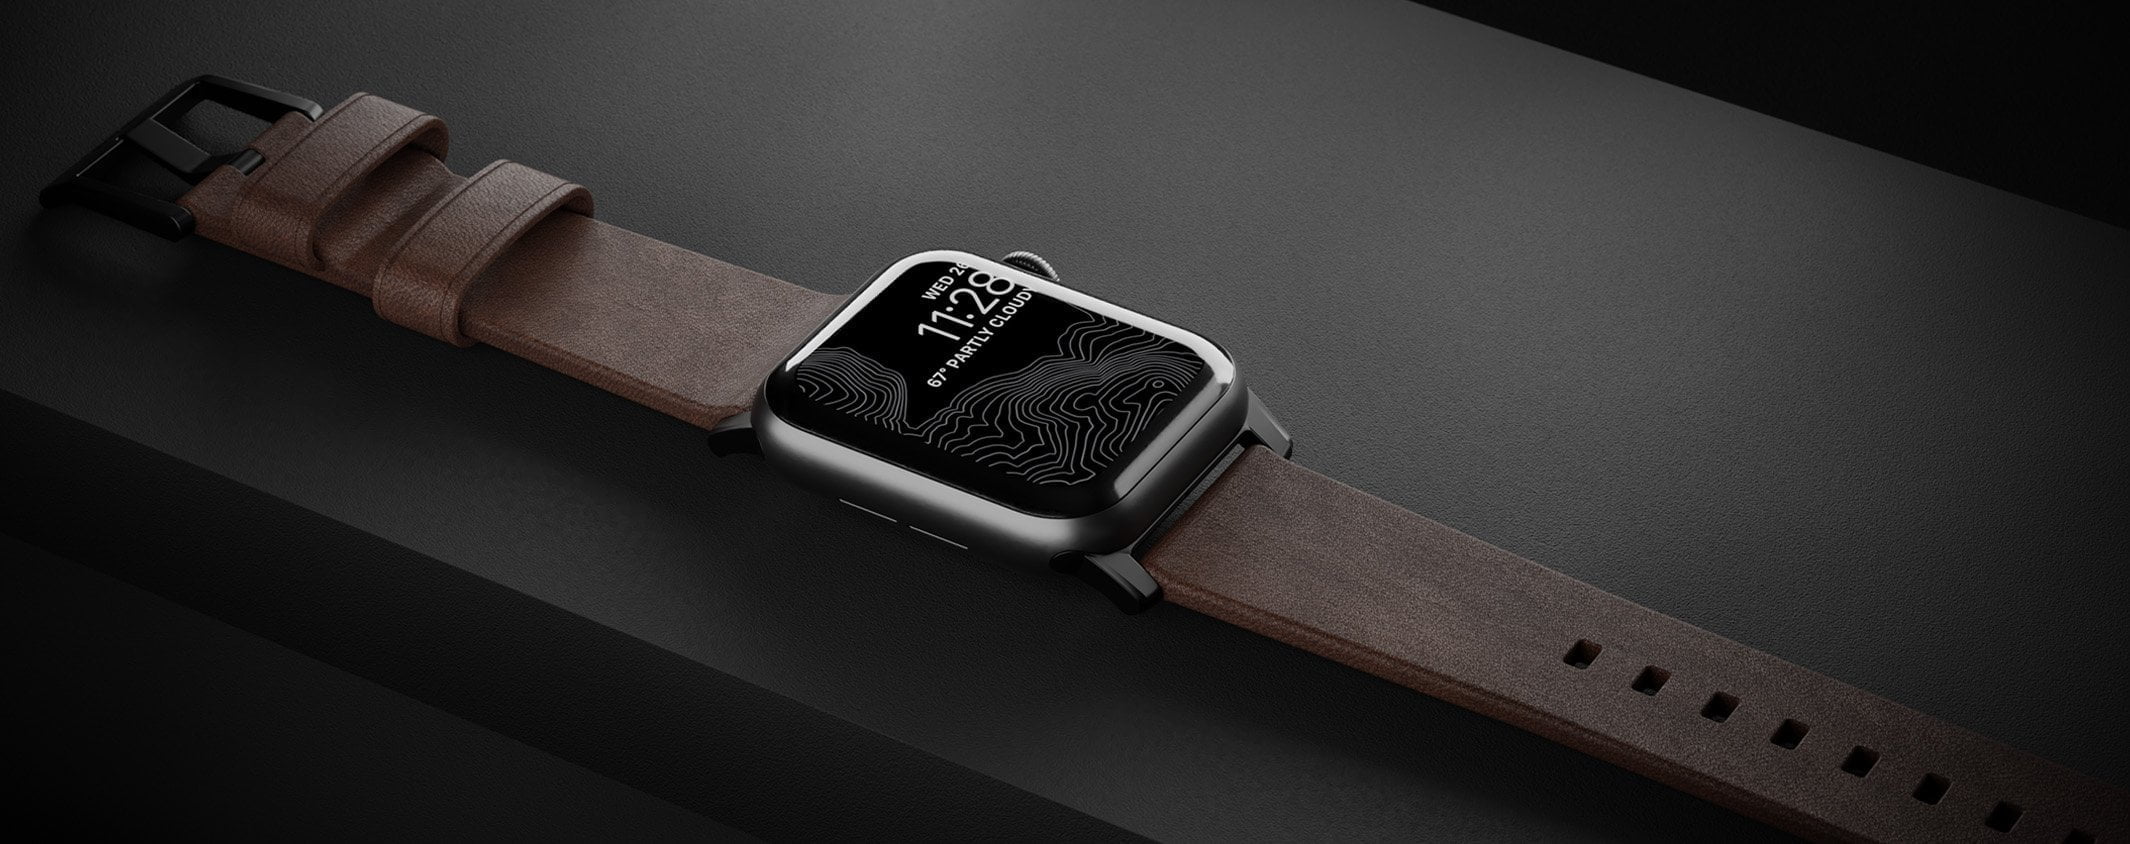 Nomad - Modern - Leather strap Apple Watch - Band-Band